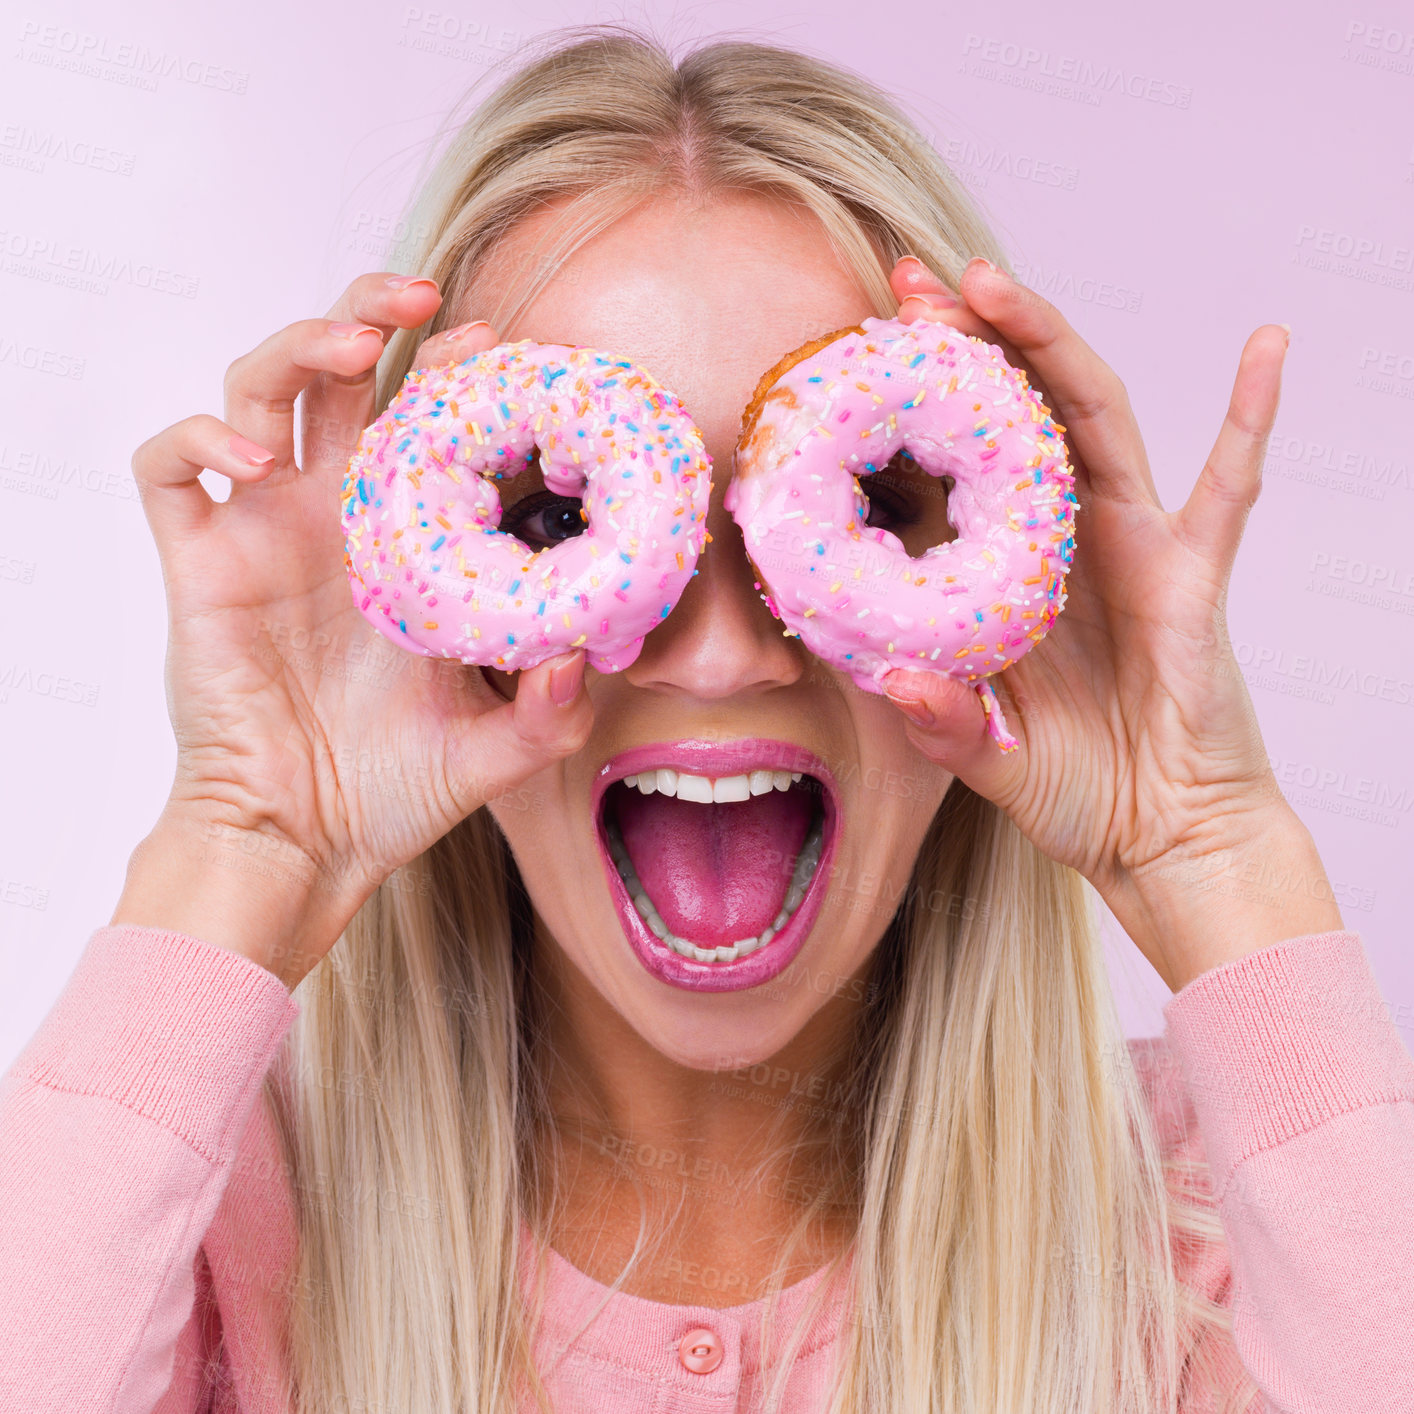 Buy stock photo Cropped shot of a woman holding donuts in front of her eyes while isolated on pink